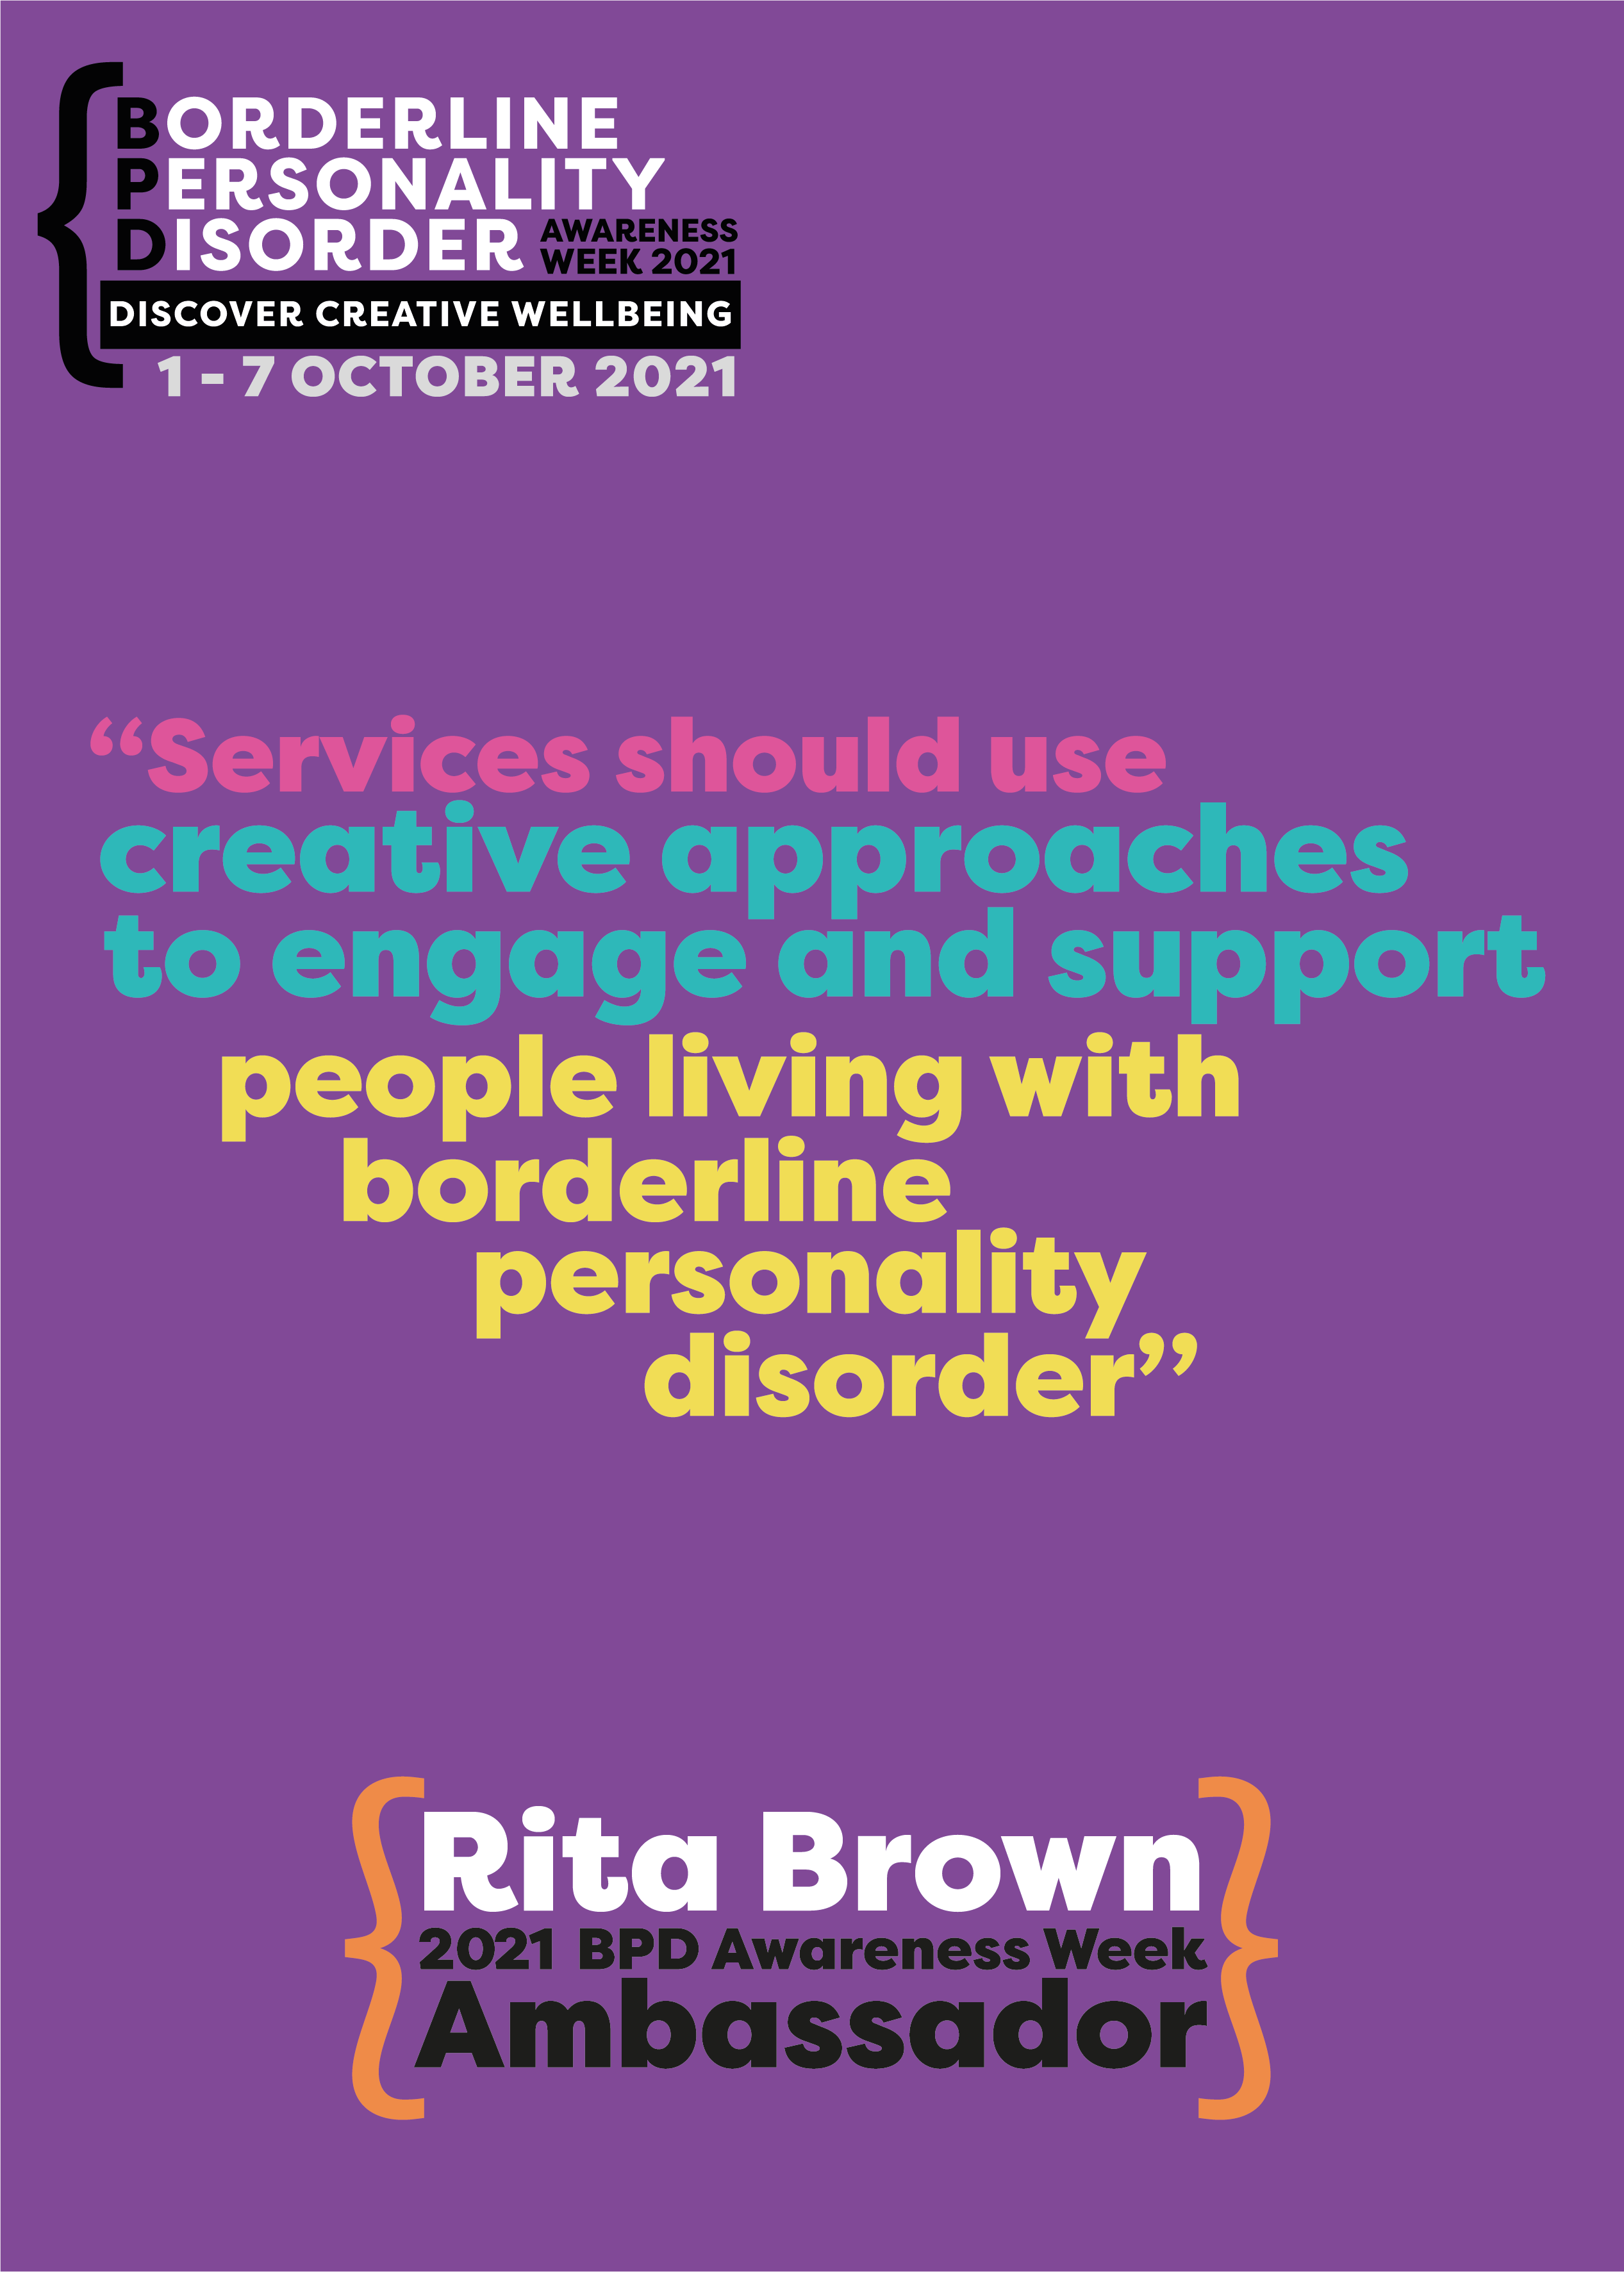 Services should use creative approaches to engage and support people living with borderline personality disorder